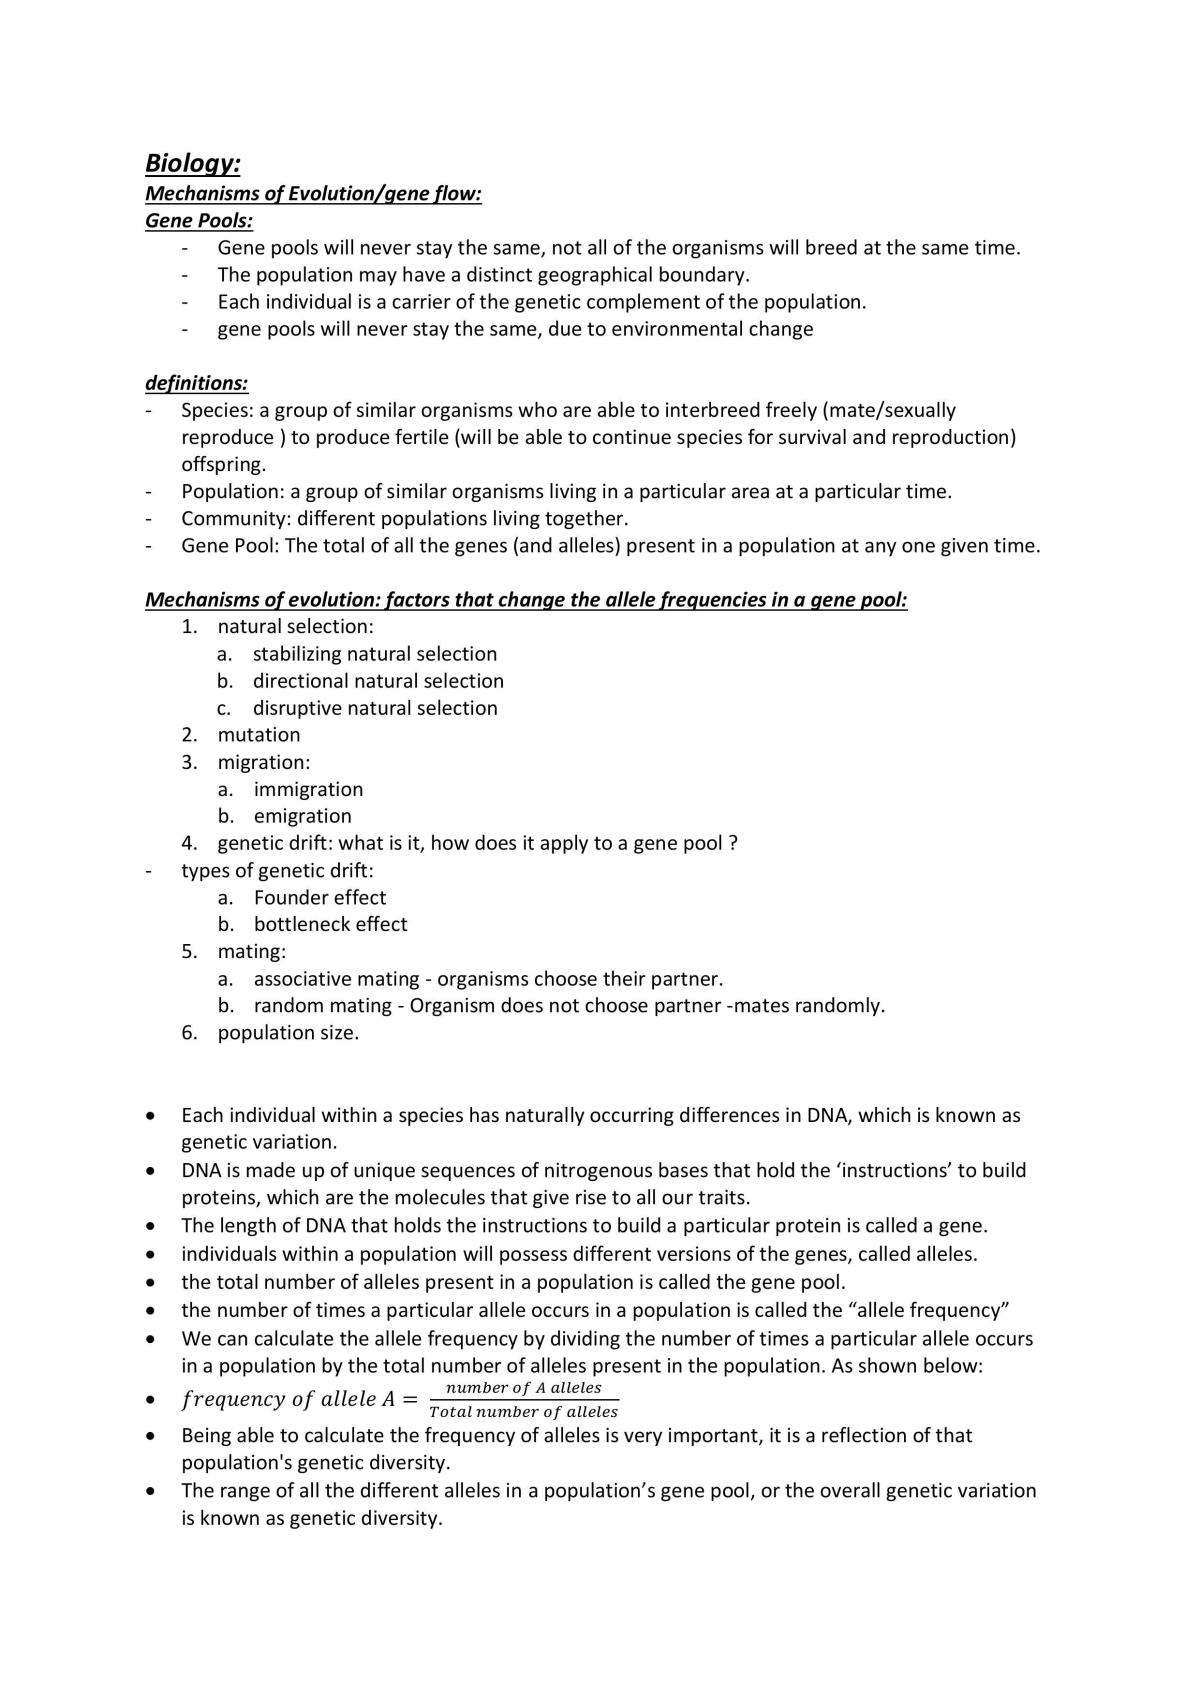 Ncea Level 2 Biology Mechanisms of Evolution Full Study Notes  - Page 1